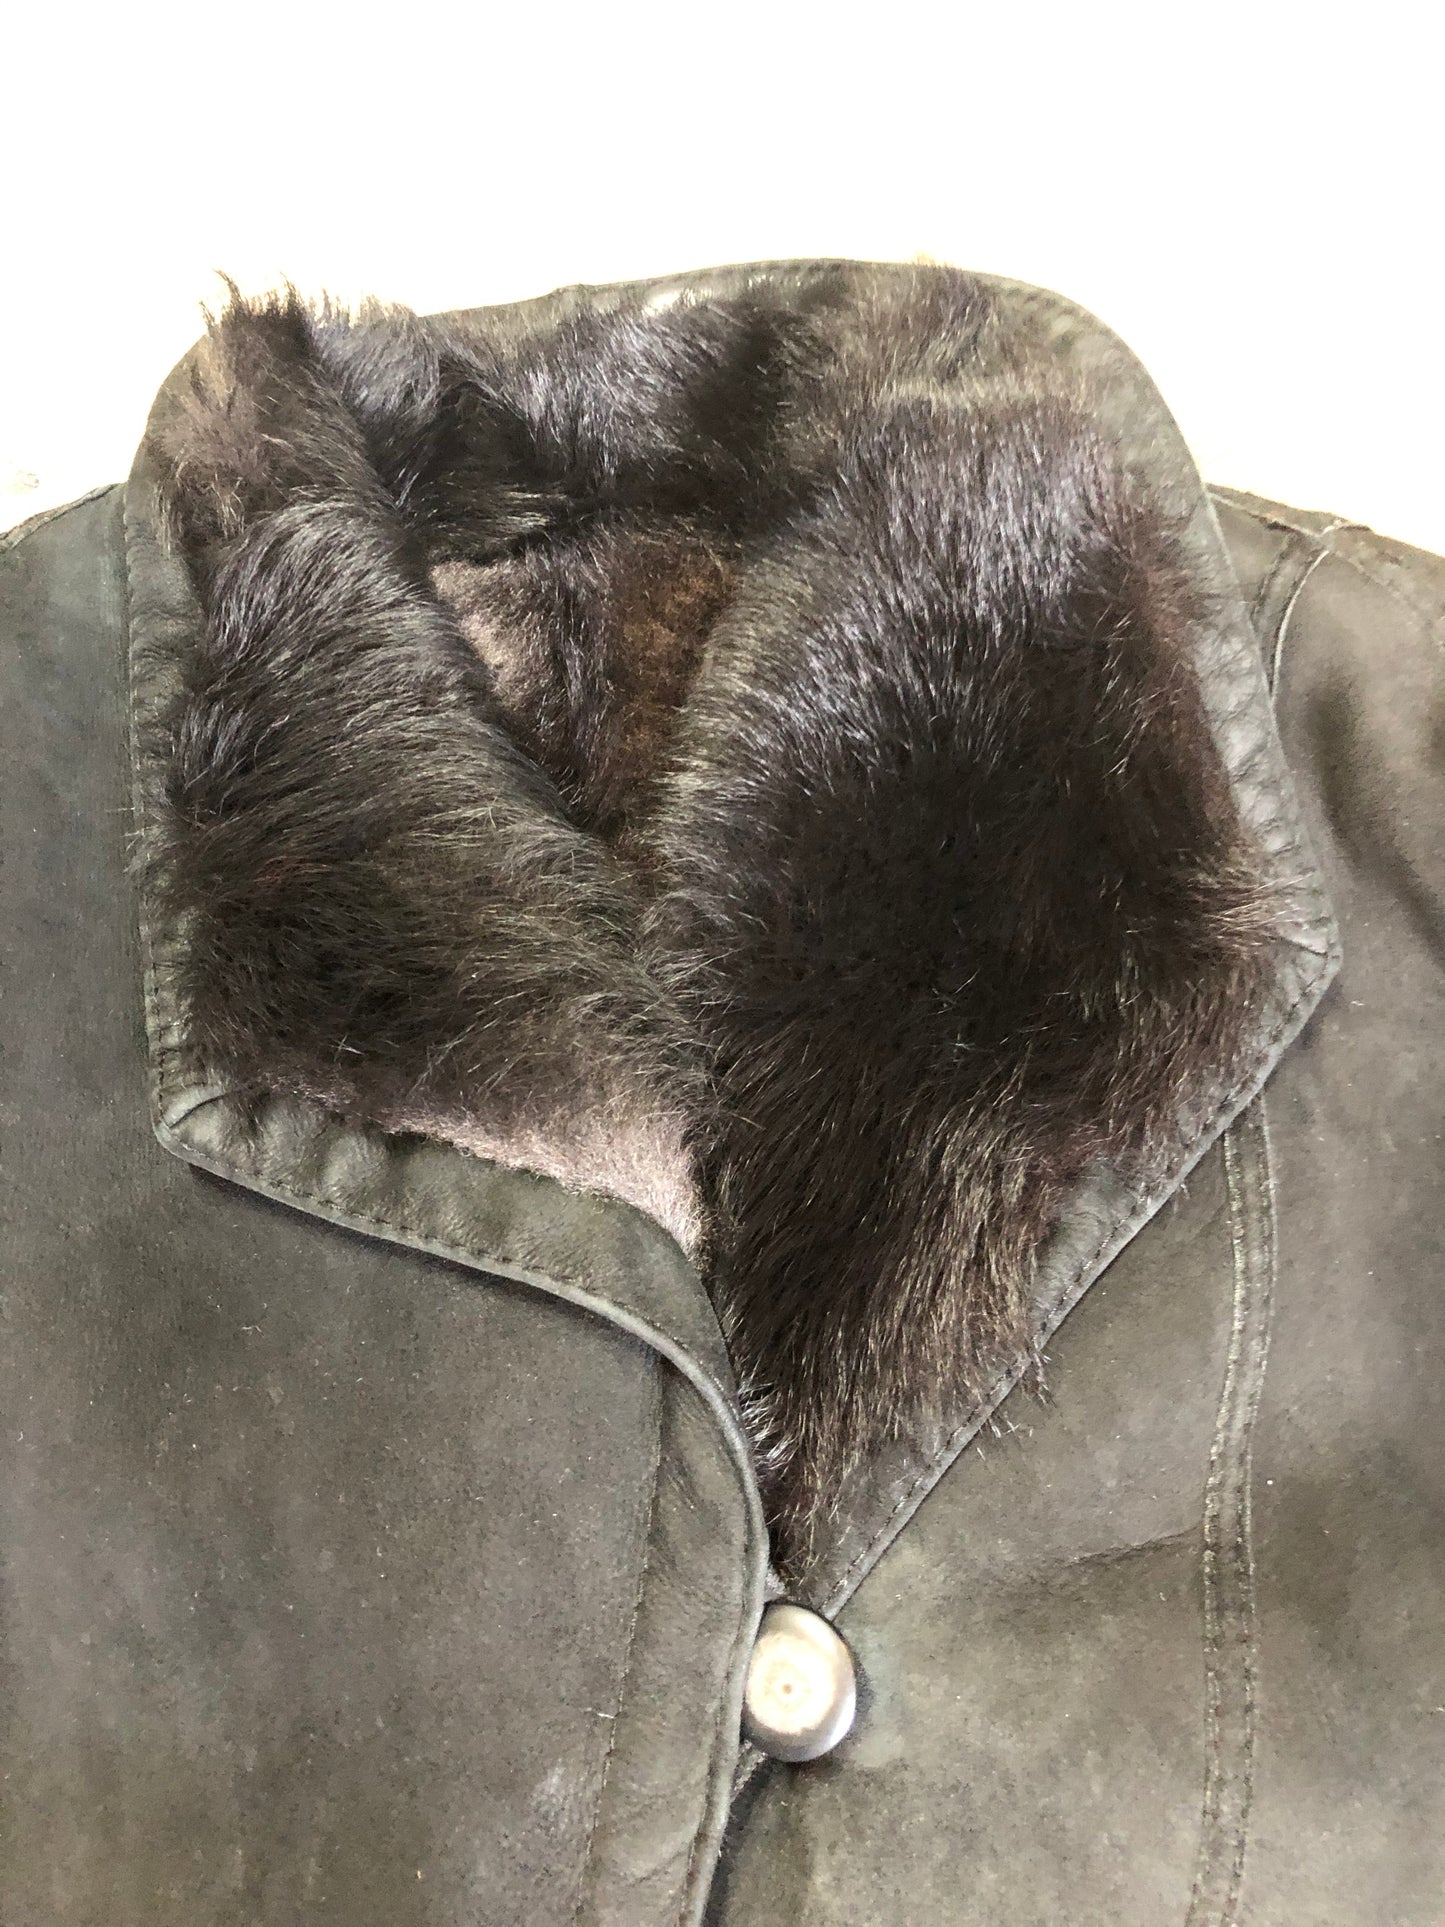 Kingspier Vintage - Black shearling coat with shearling lining, button closures and slash pockets.